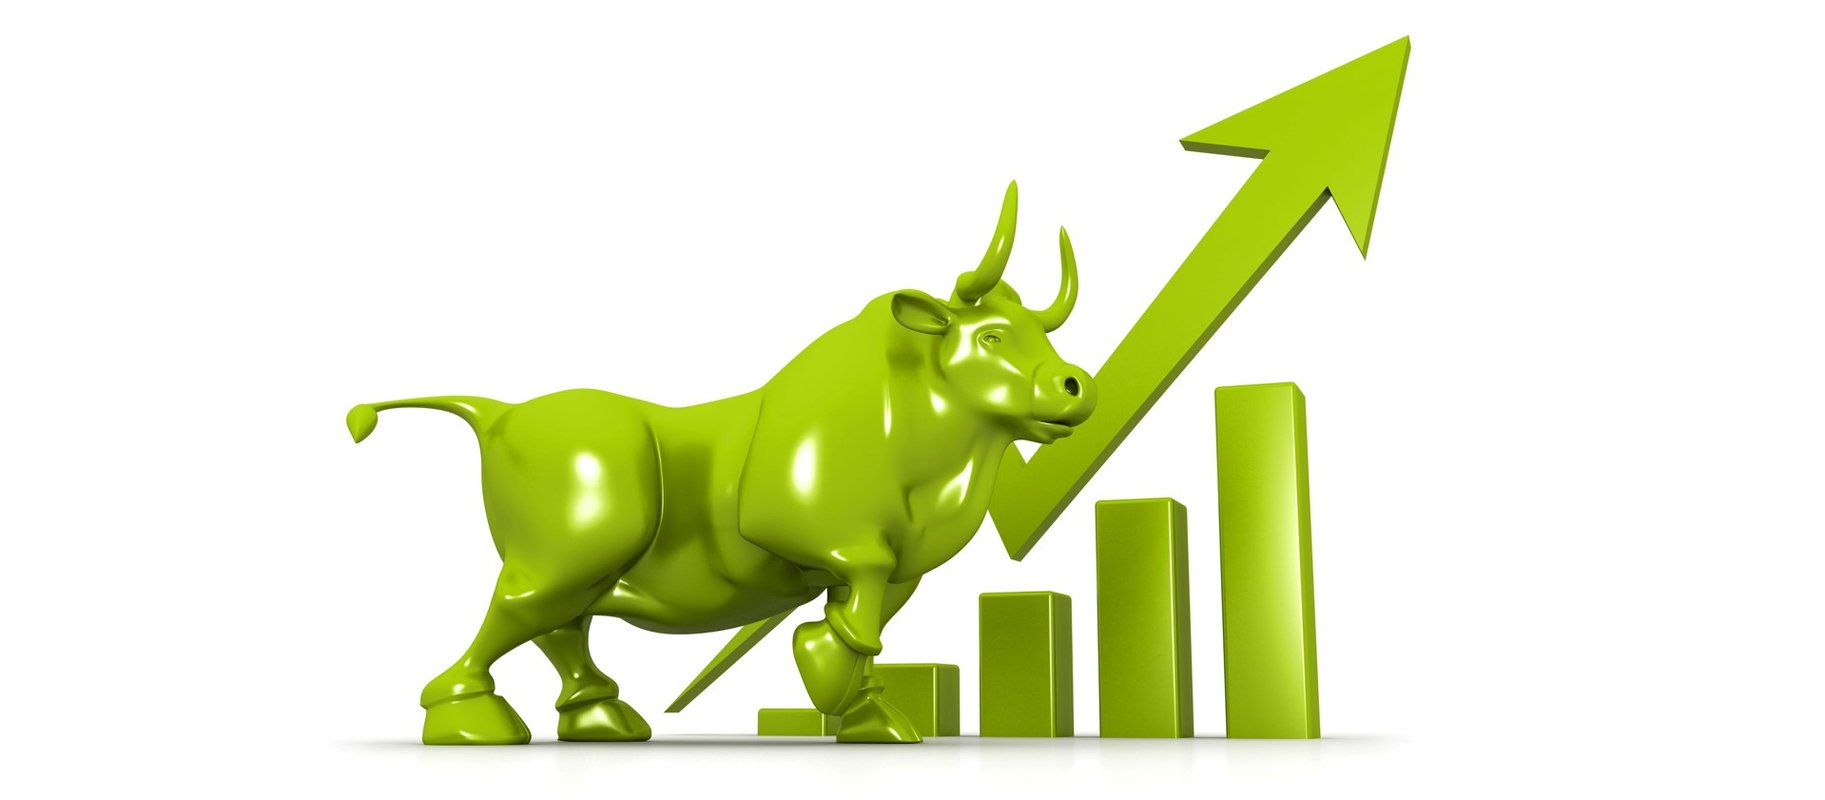 On a white background, there is a green shining bull with a rising chart, indicating an upward trend in the stock market.